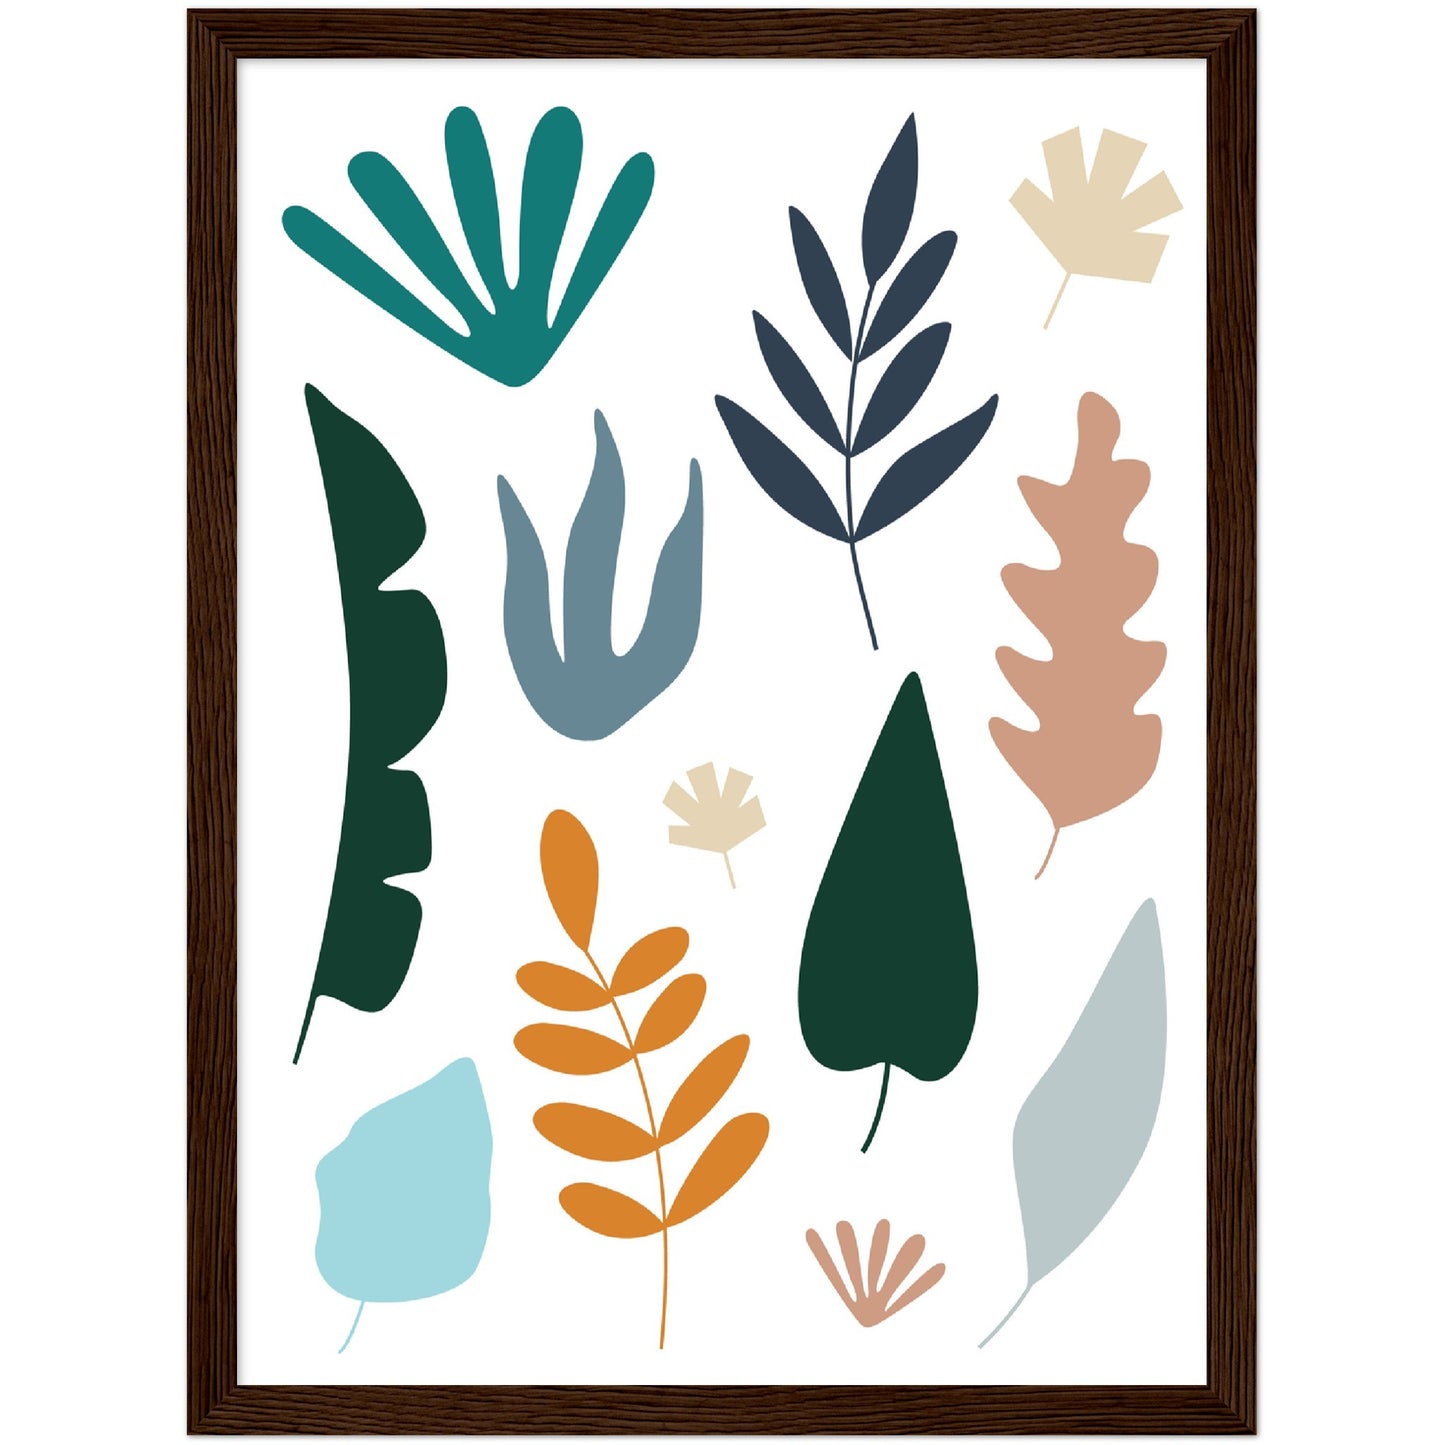 Simply Leaf Cut Outs Print